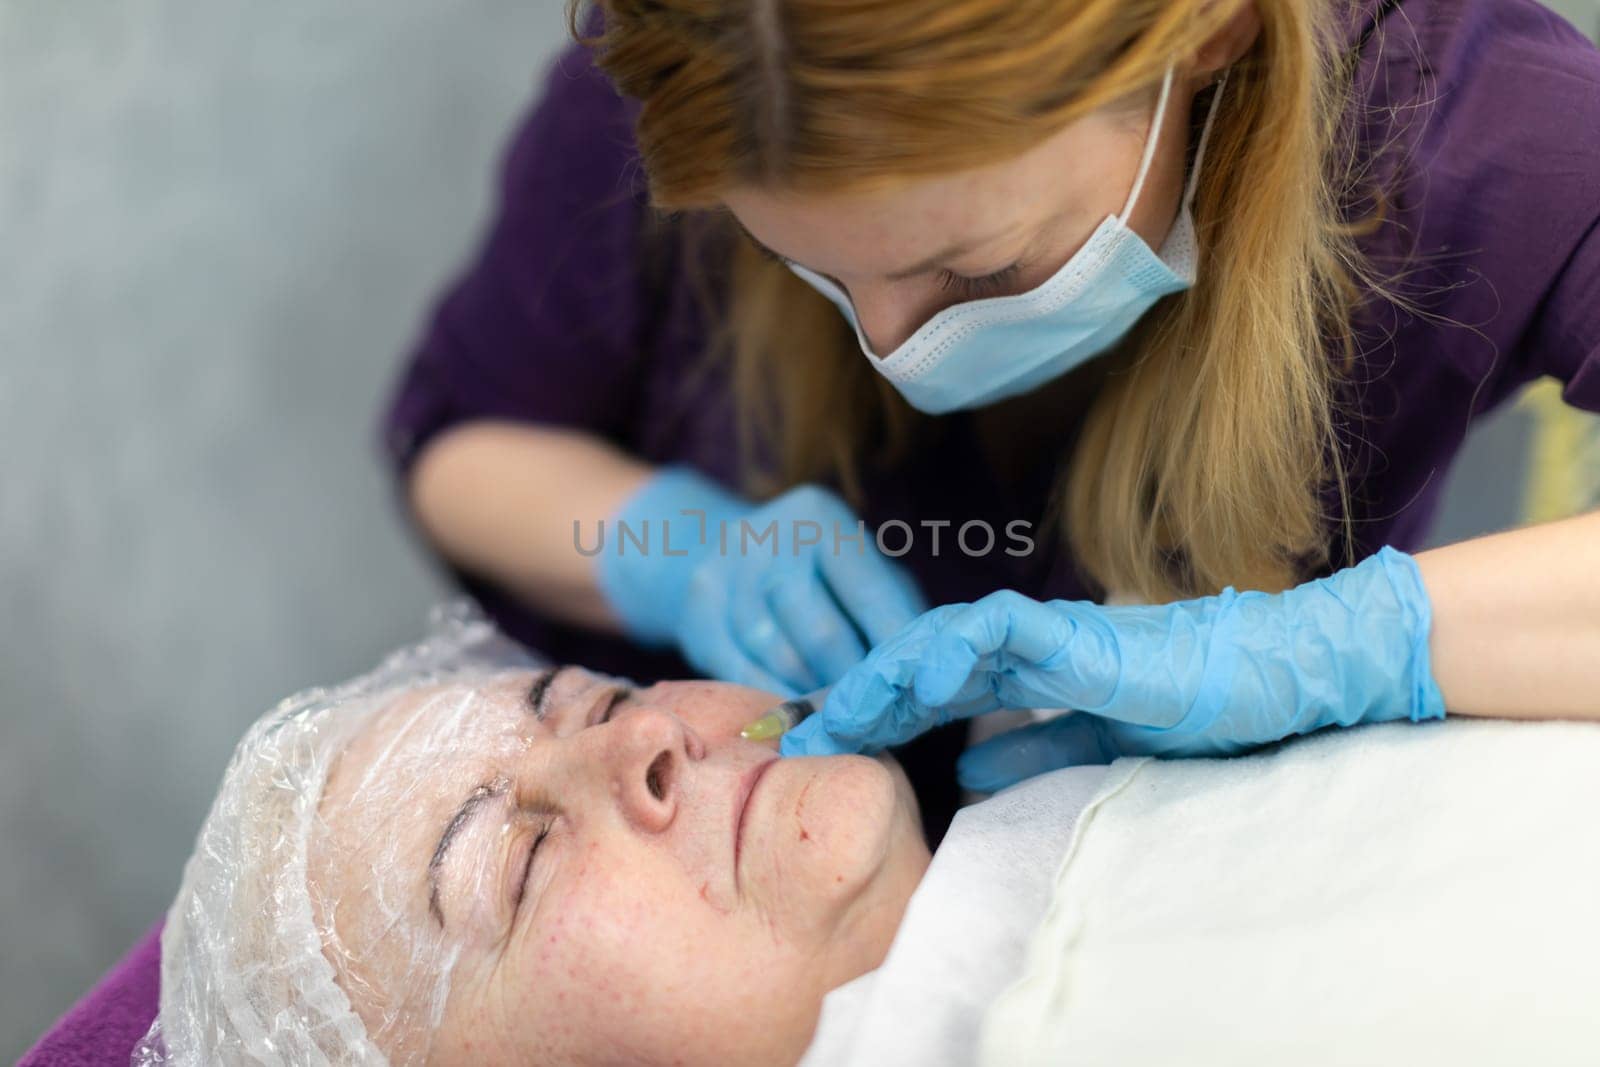 The cosmetologist is concentratedly making small, precise punctures on the patient's face. by fotodrobik